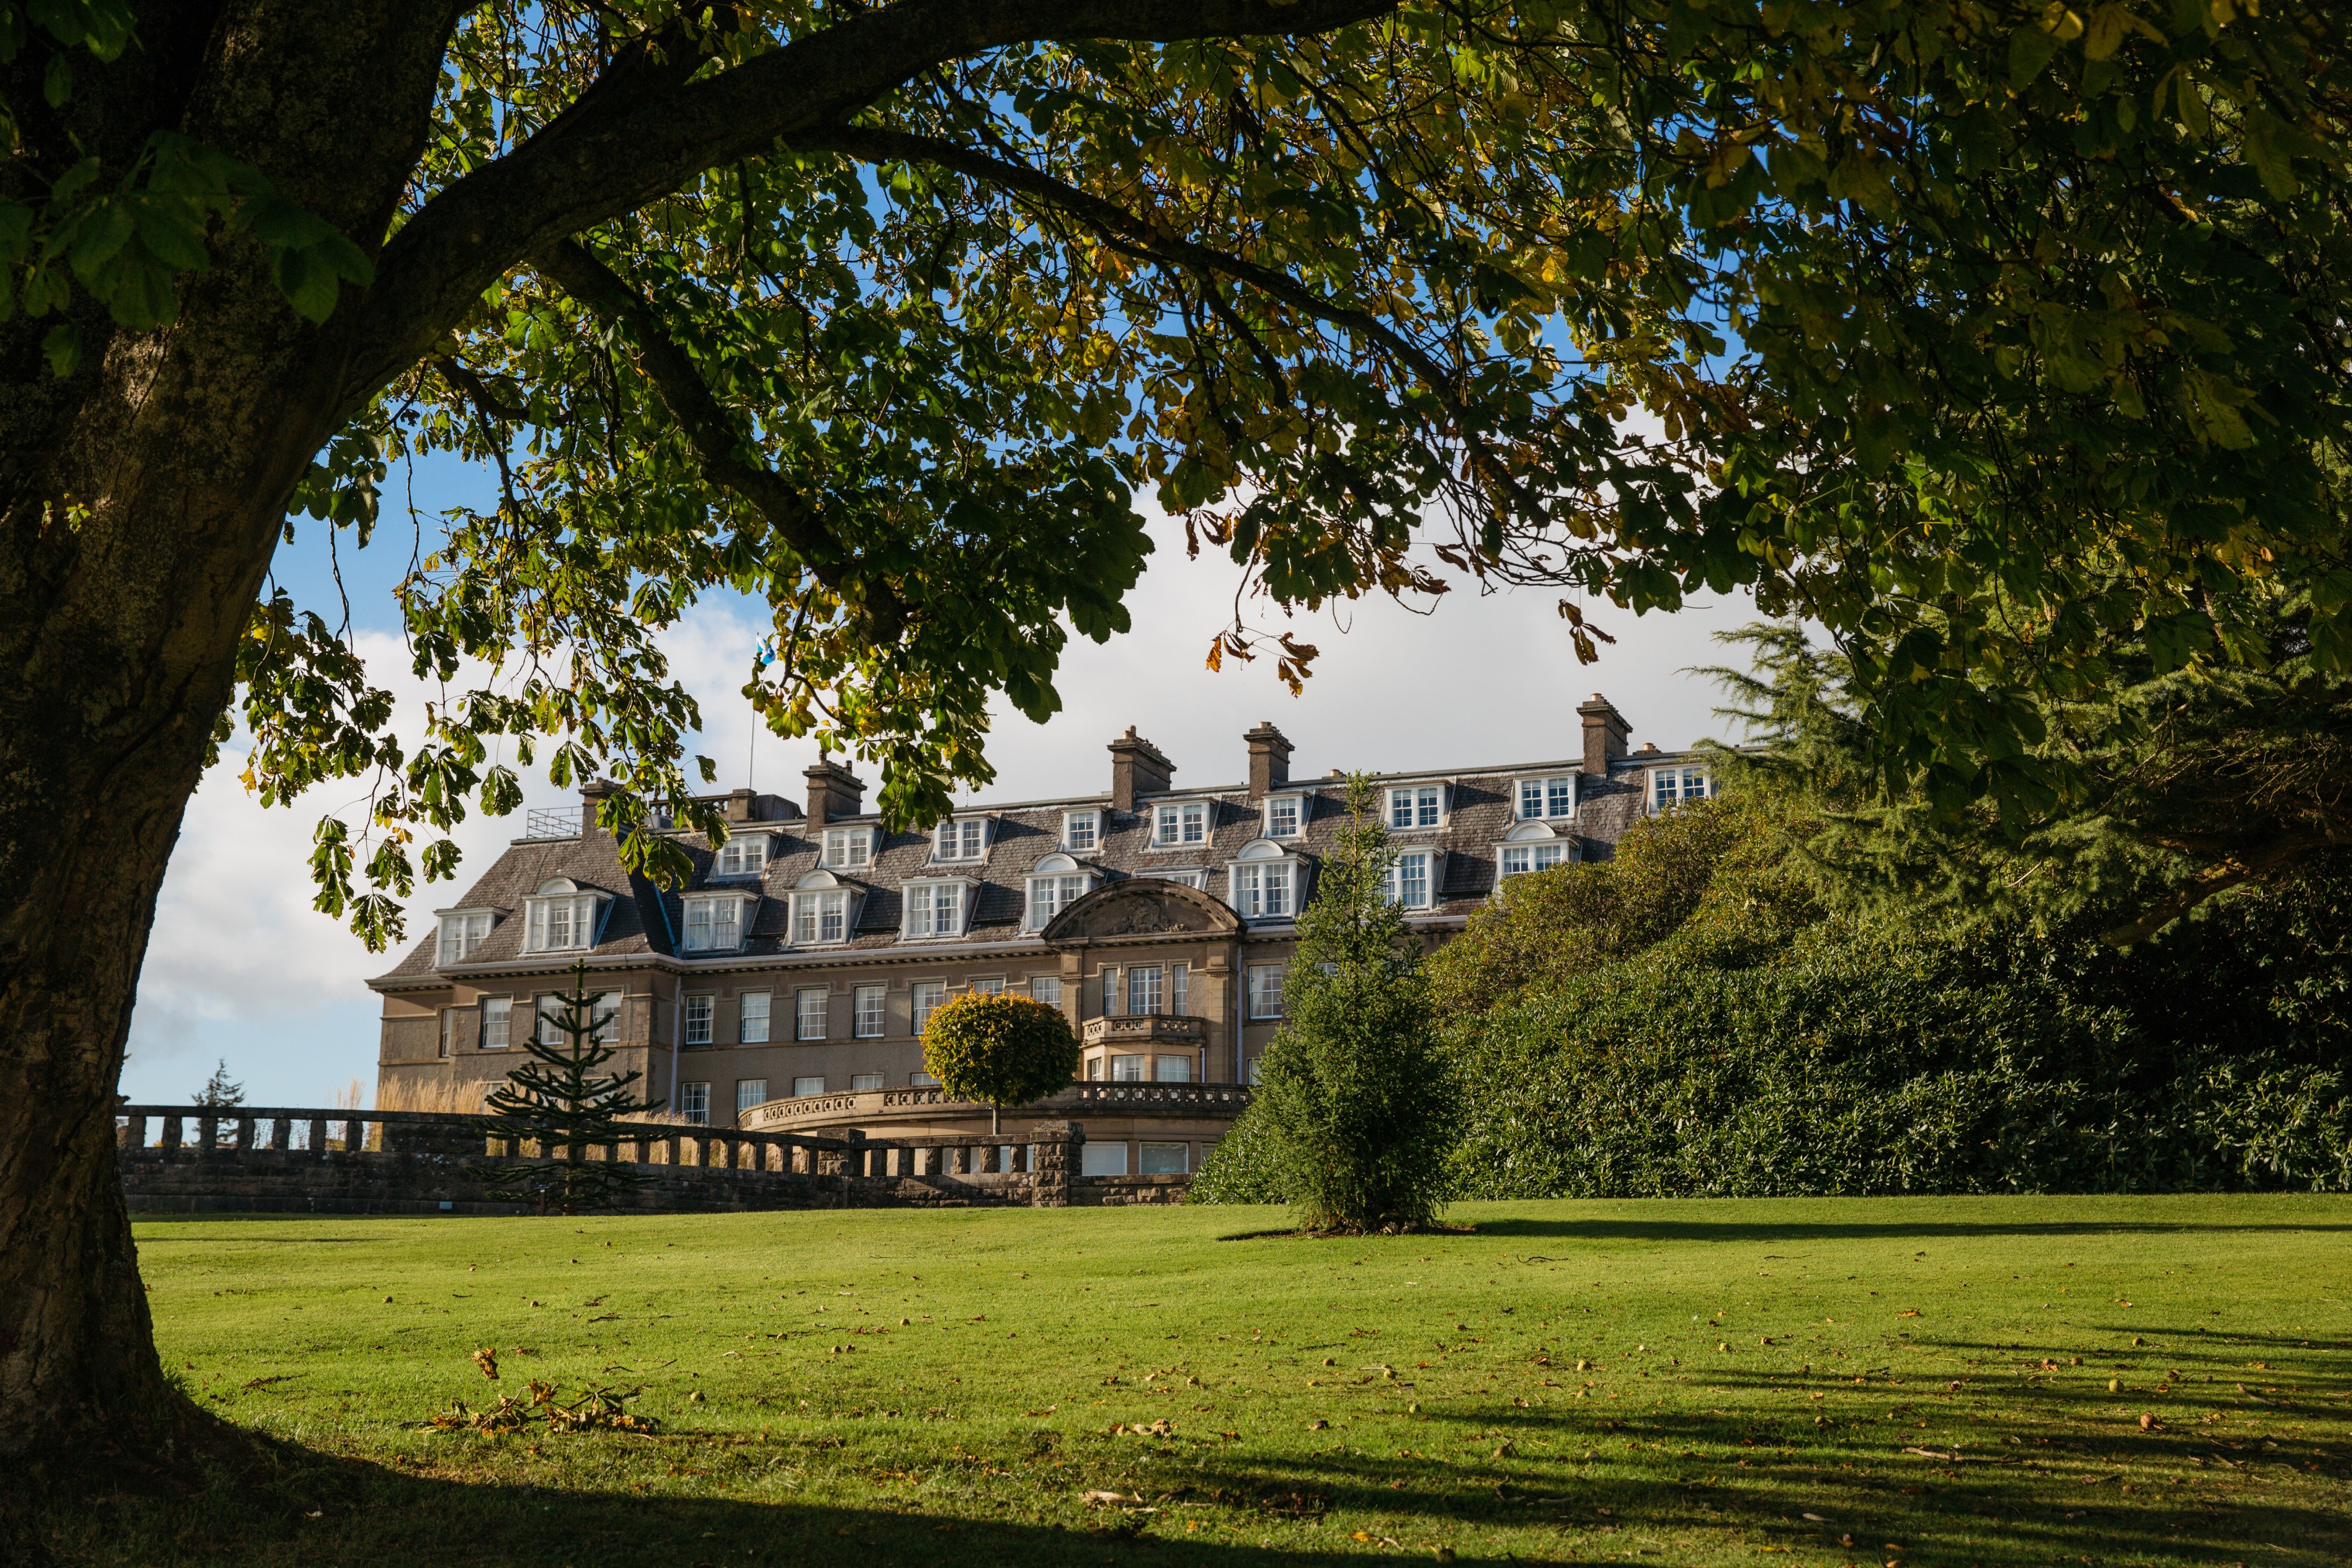 Gleneagles, Scotland, one of the locations used in the filming of HBO’s Succession. Photo: HBO GO